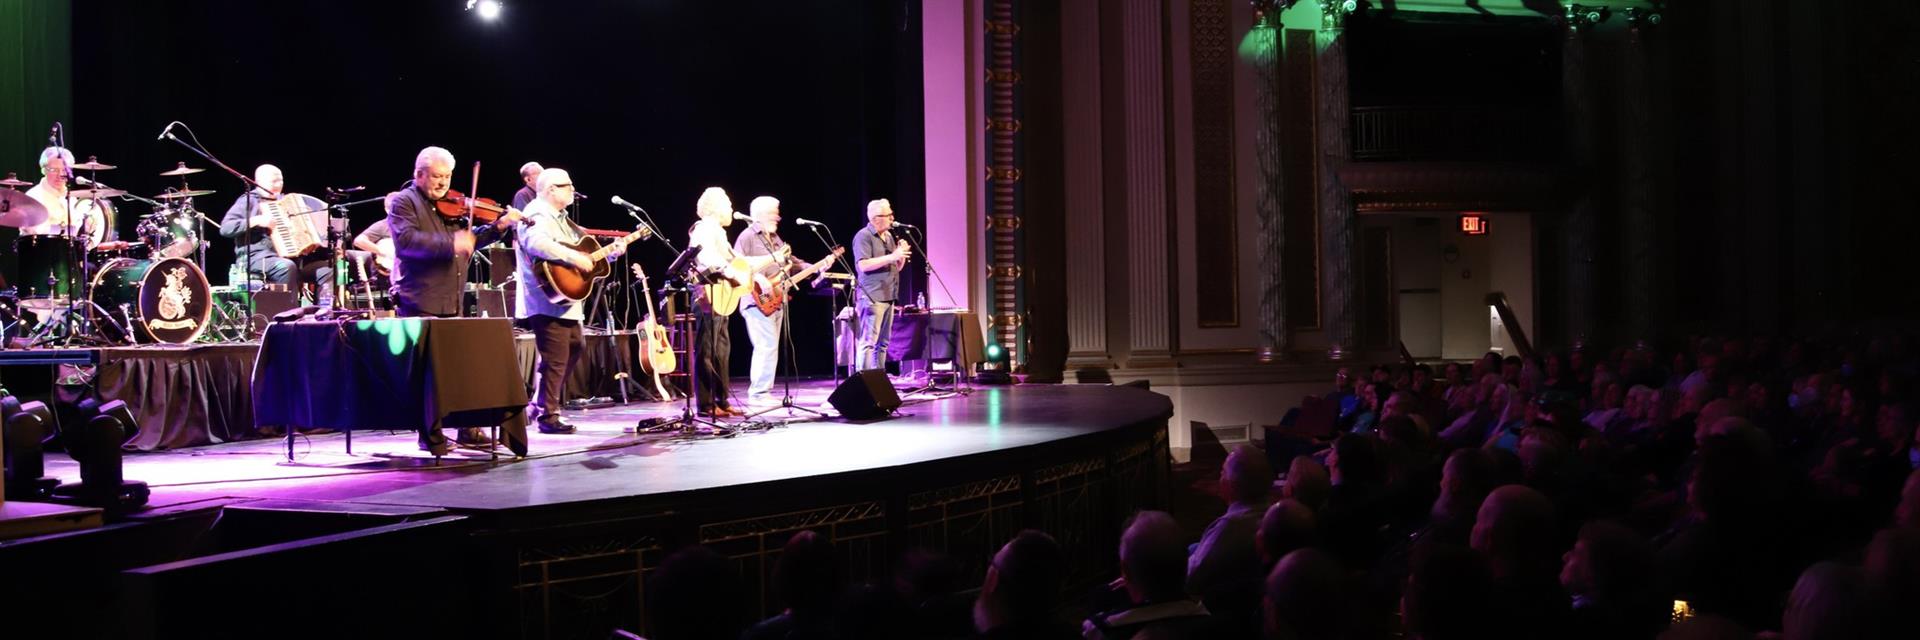 live band playing at a theatre with crowd